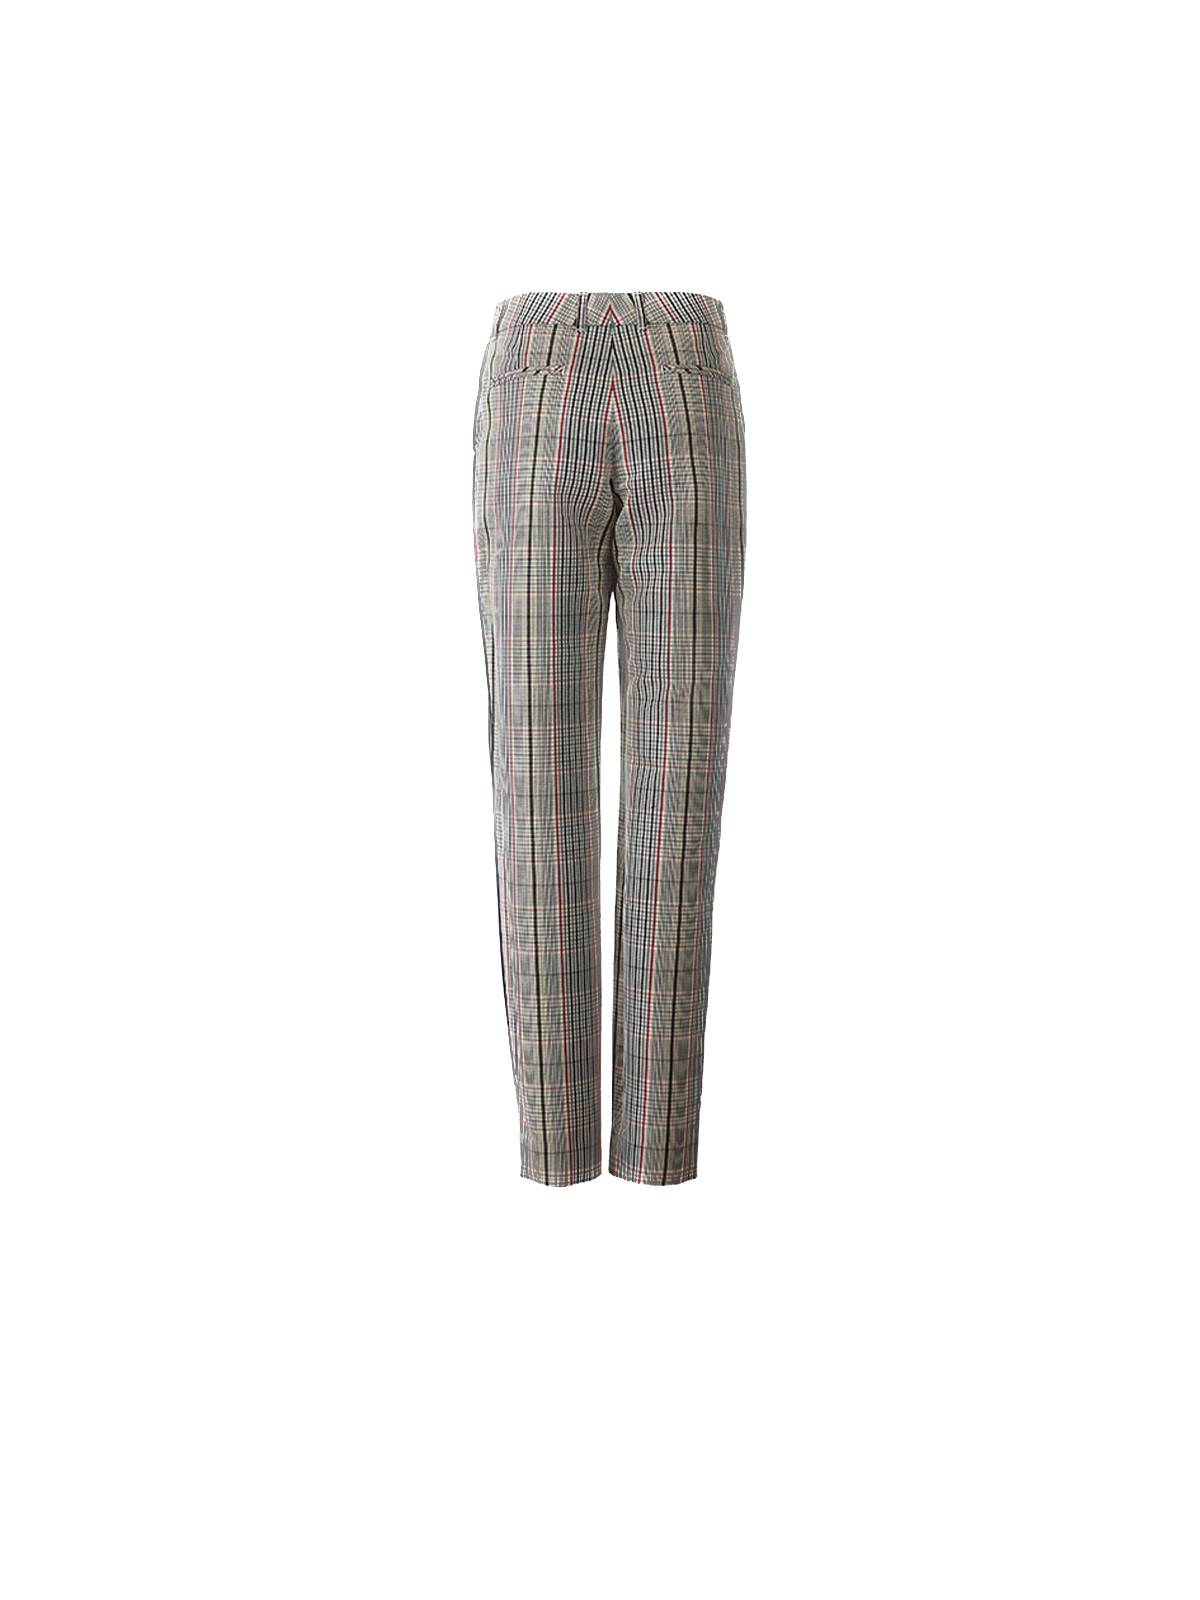 Fancy check Trousers